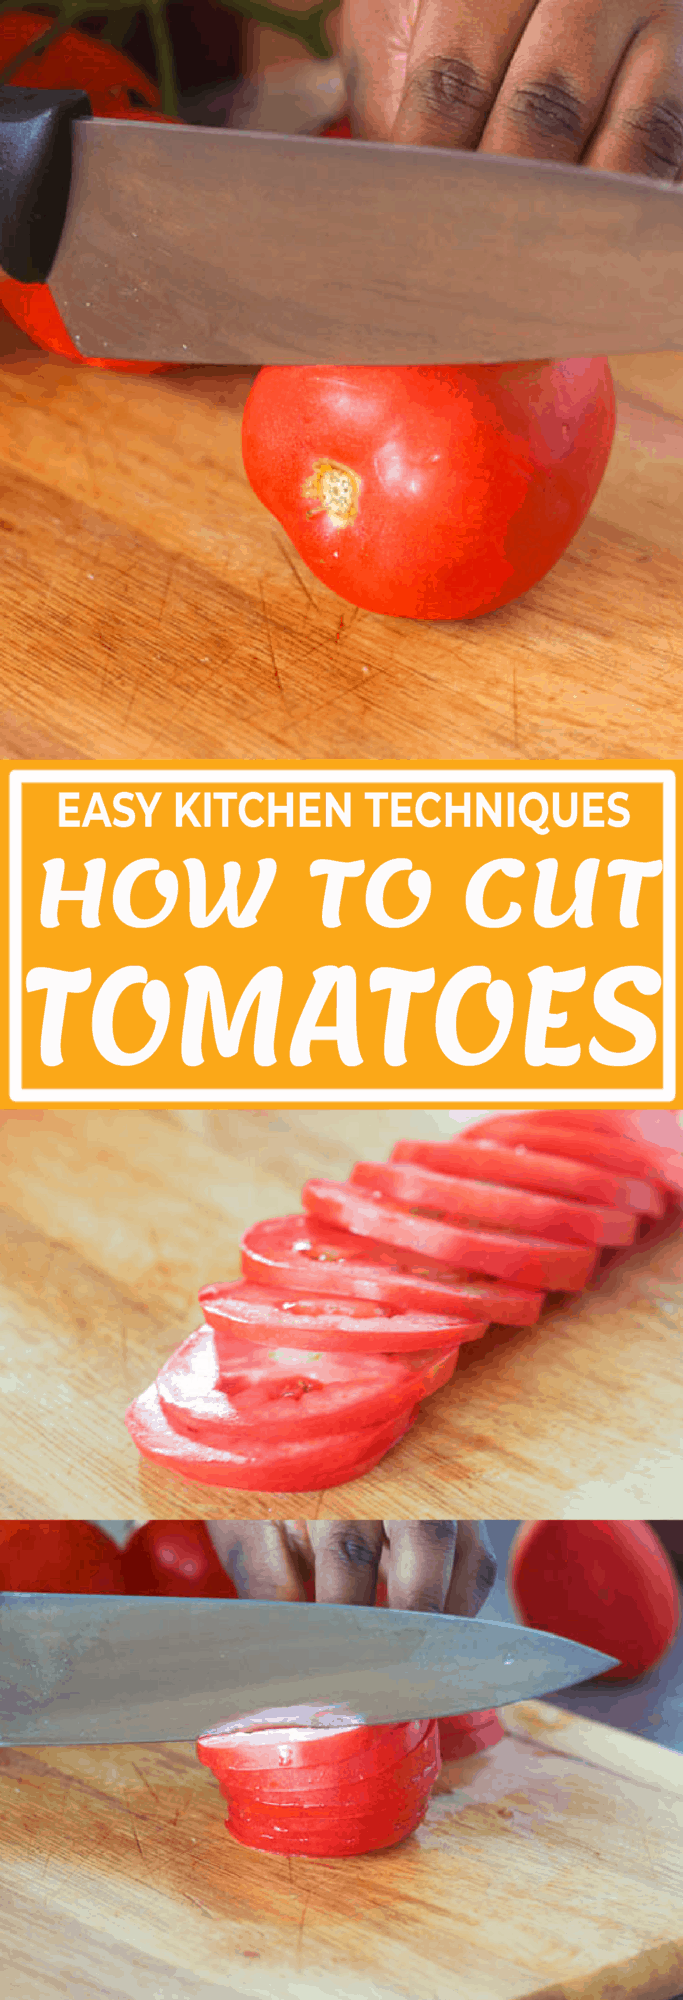 How to Cut Tomatoes